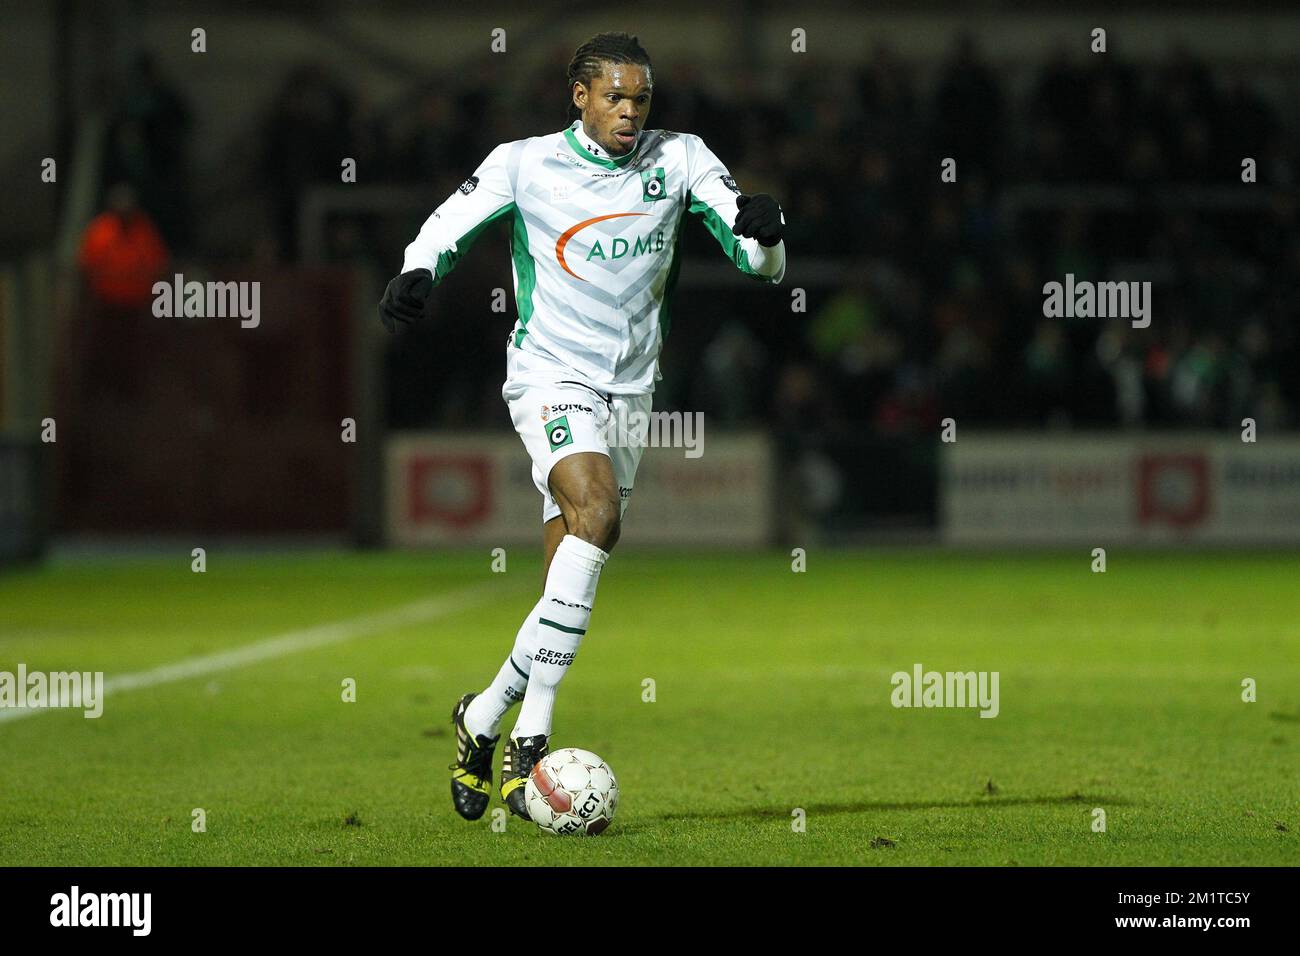 20131207 - OOSTENDE, BELGIUM: Cercle's Michael Uchebo in action during the Jupiler Pro League match between KV Oostende and Cercle Brugge KSV, in Oostende, Saturday 07 December 2013, on day 18 of the Belgian soccer championship. BELGA PHOTO KRISTOF VAN ACCOM Stock Photo